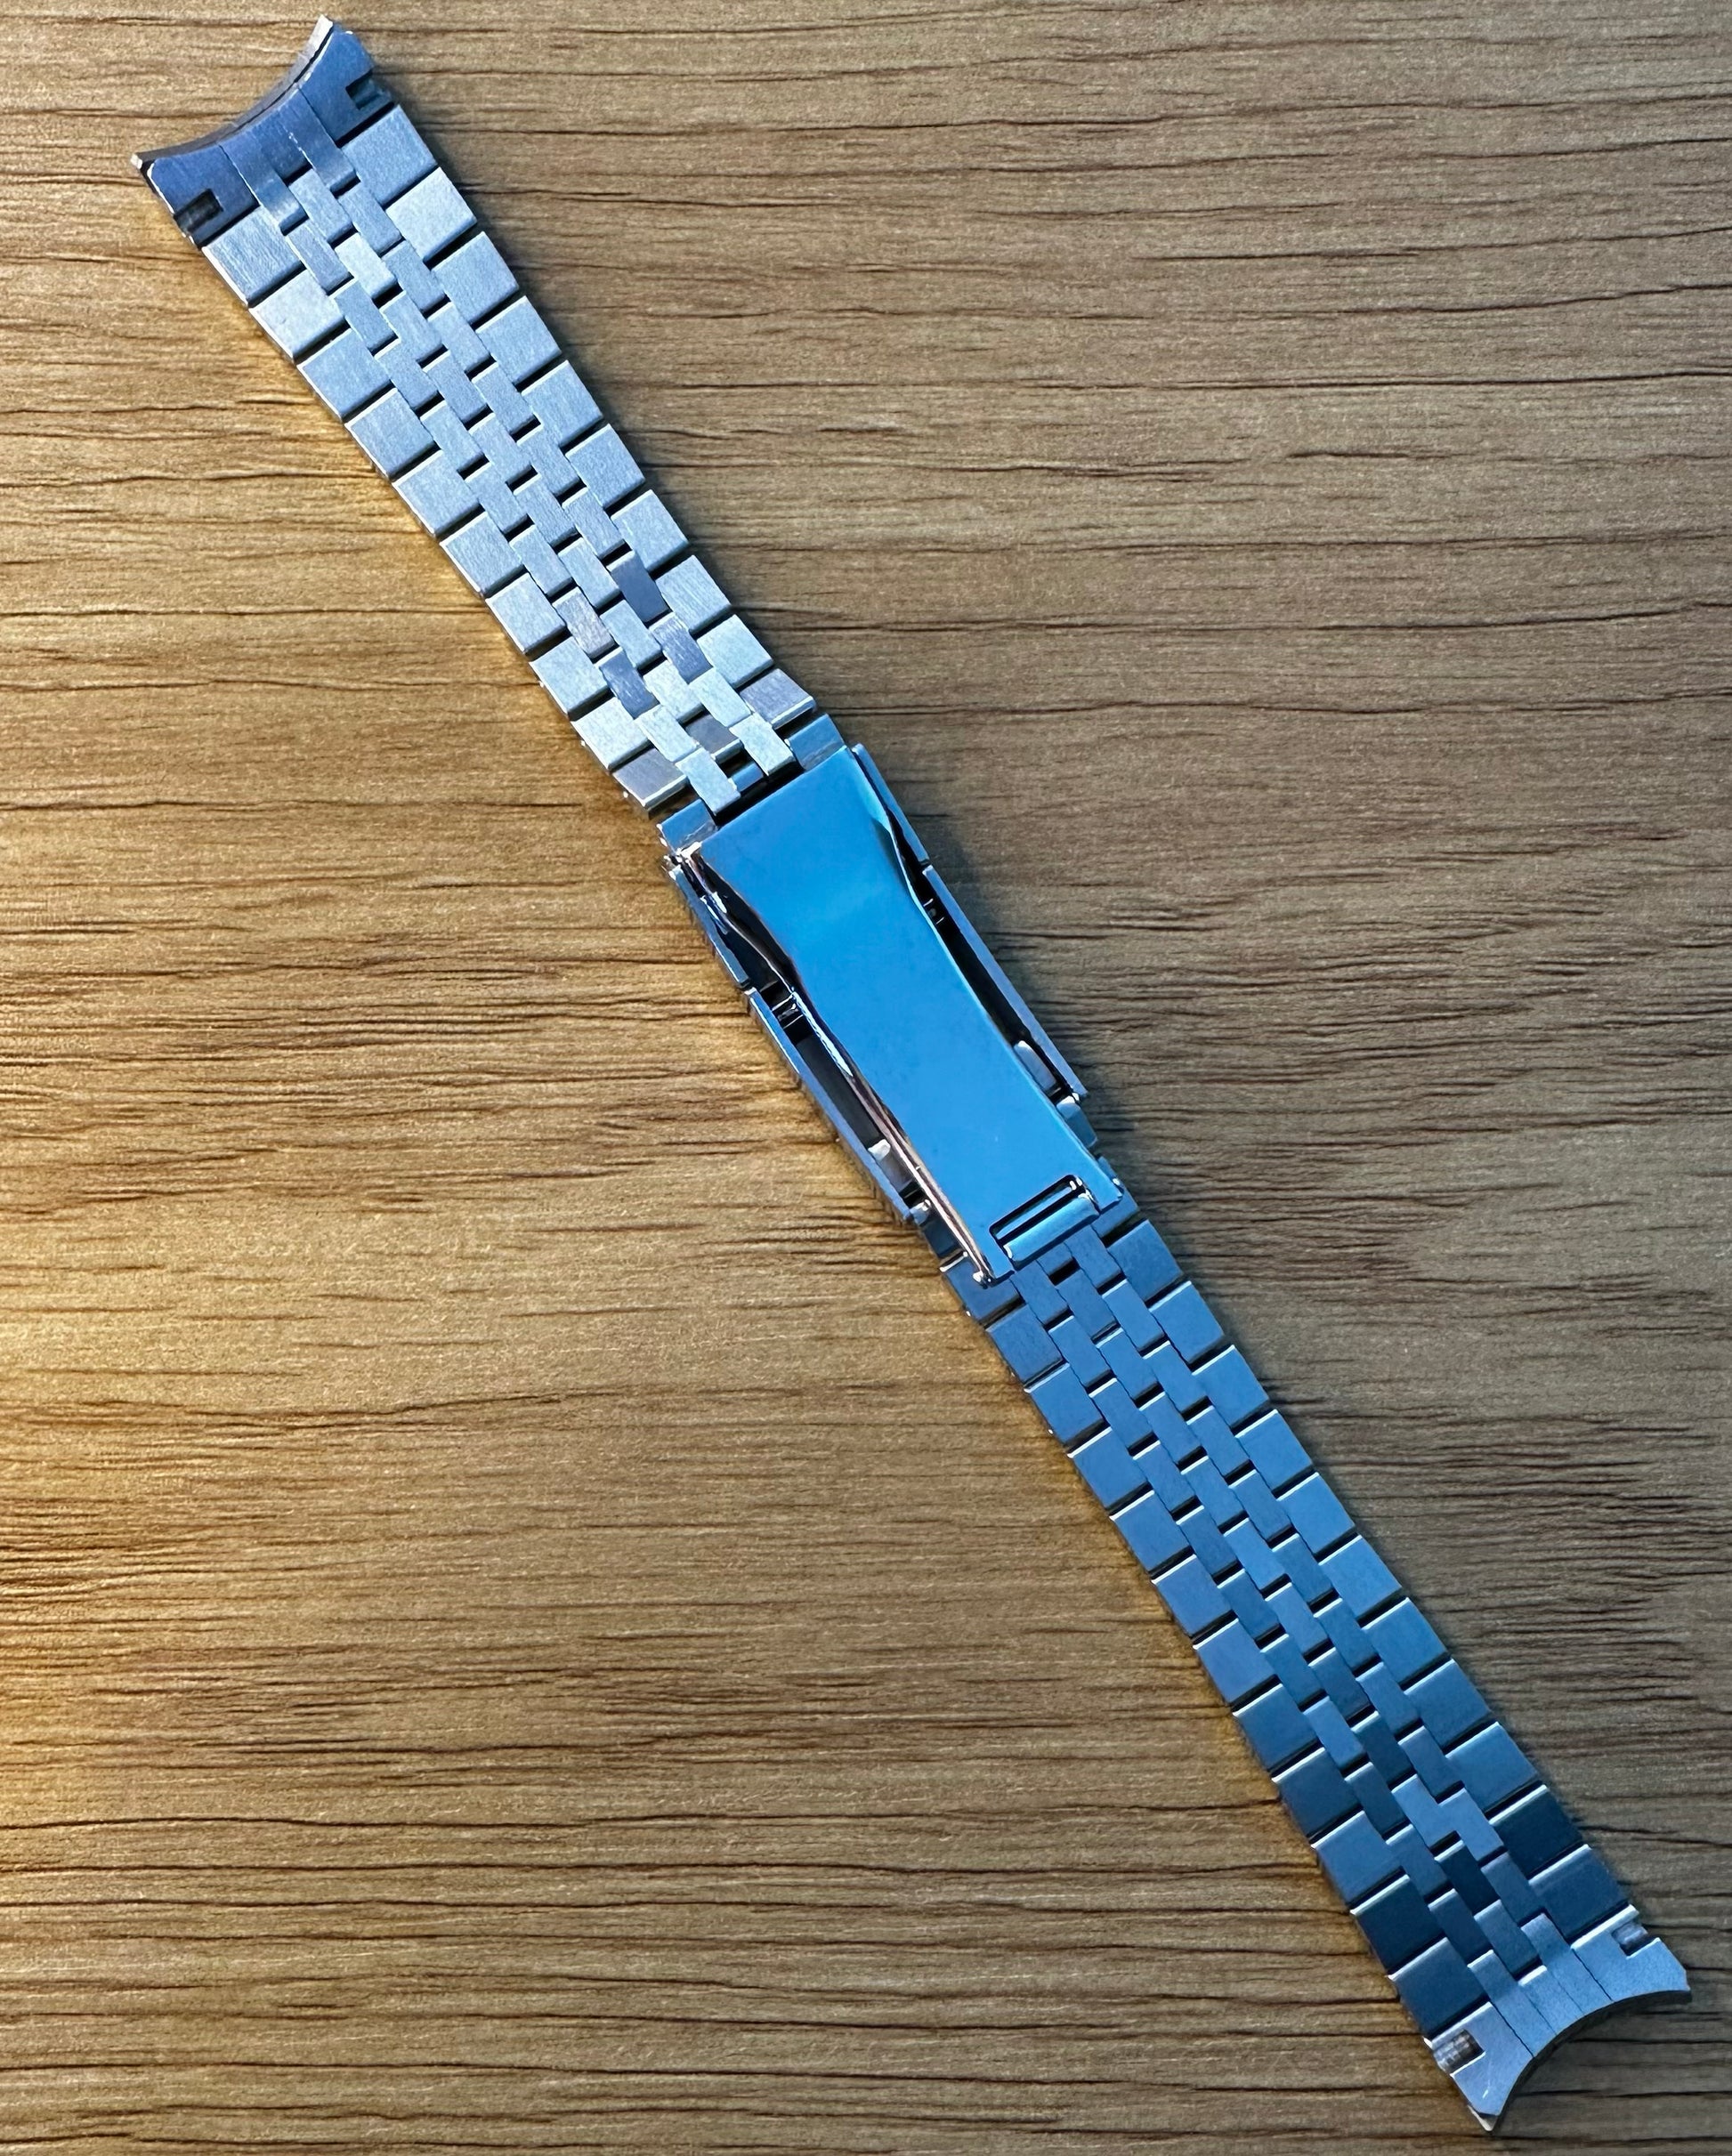 Replacement Rolex Jubilee Strap for Datejust and GMT Master II watches.